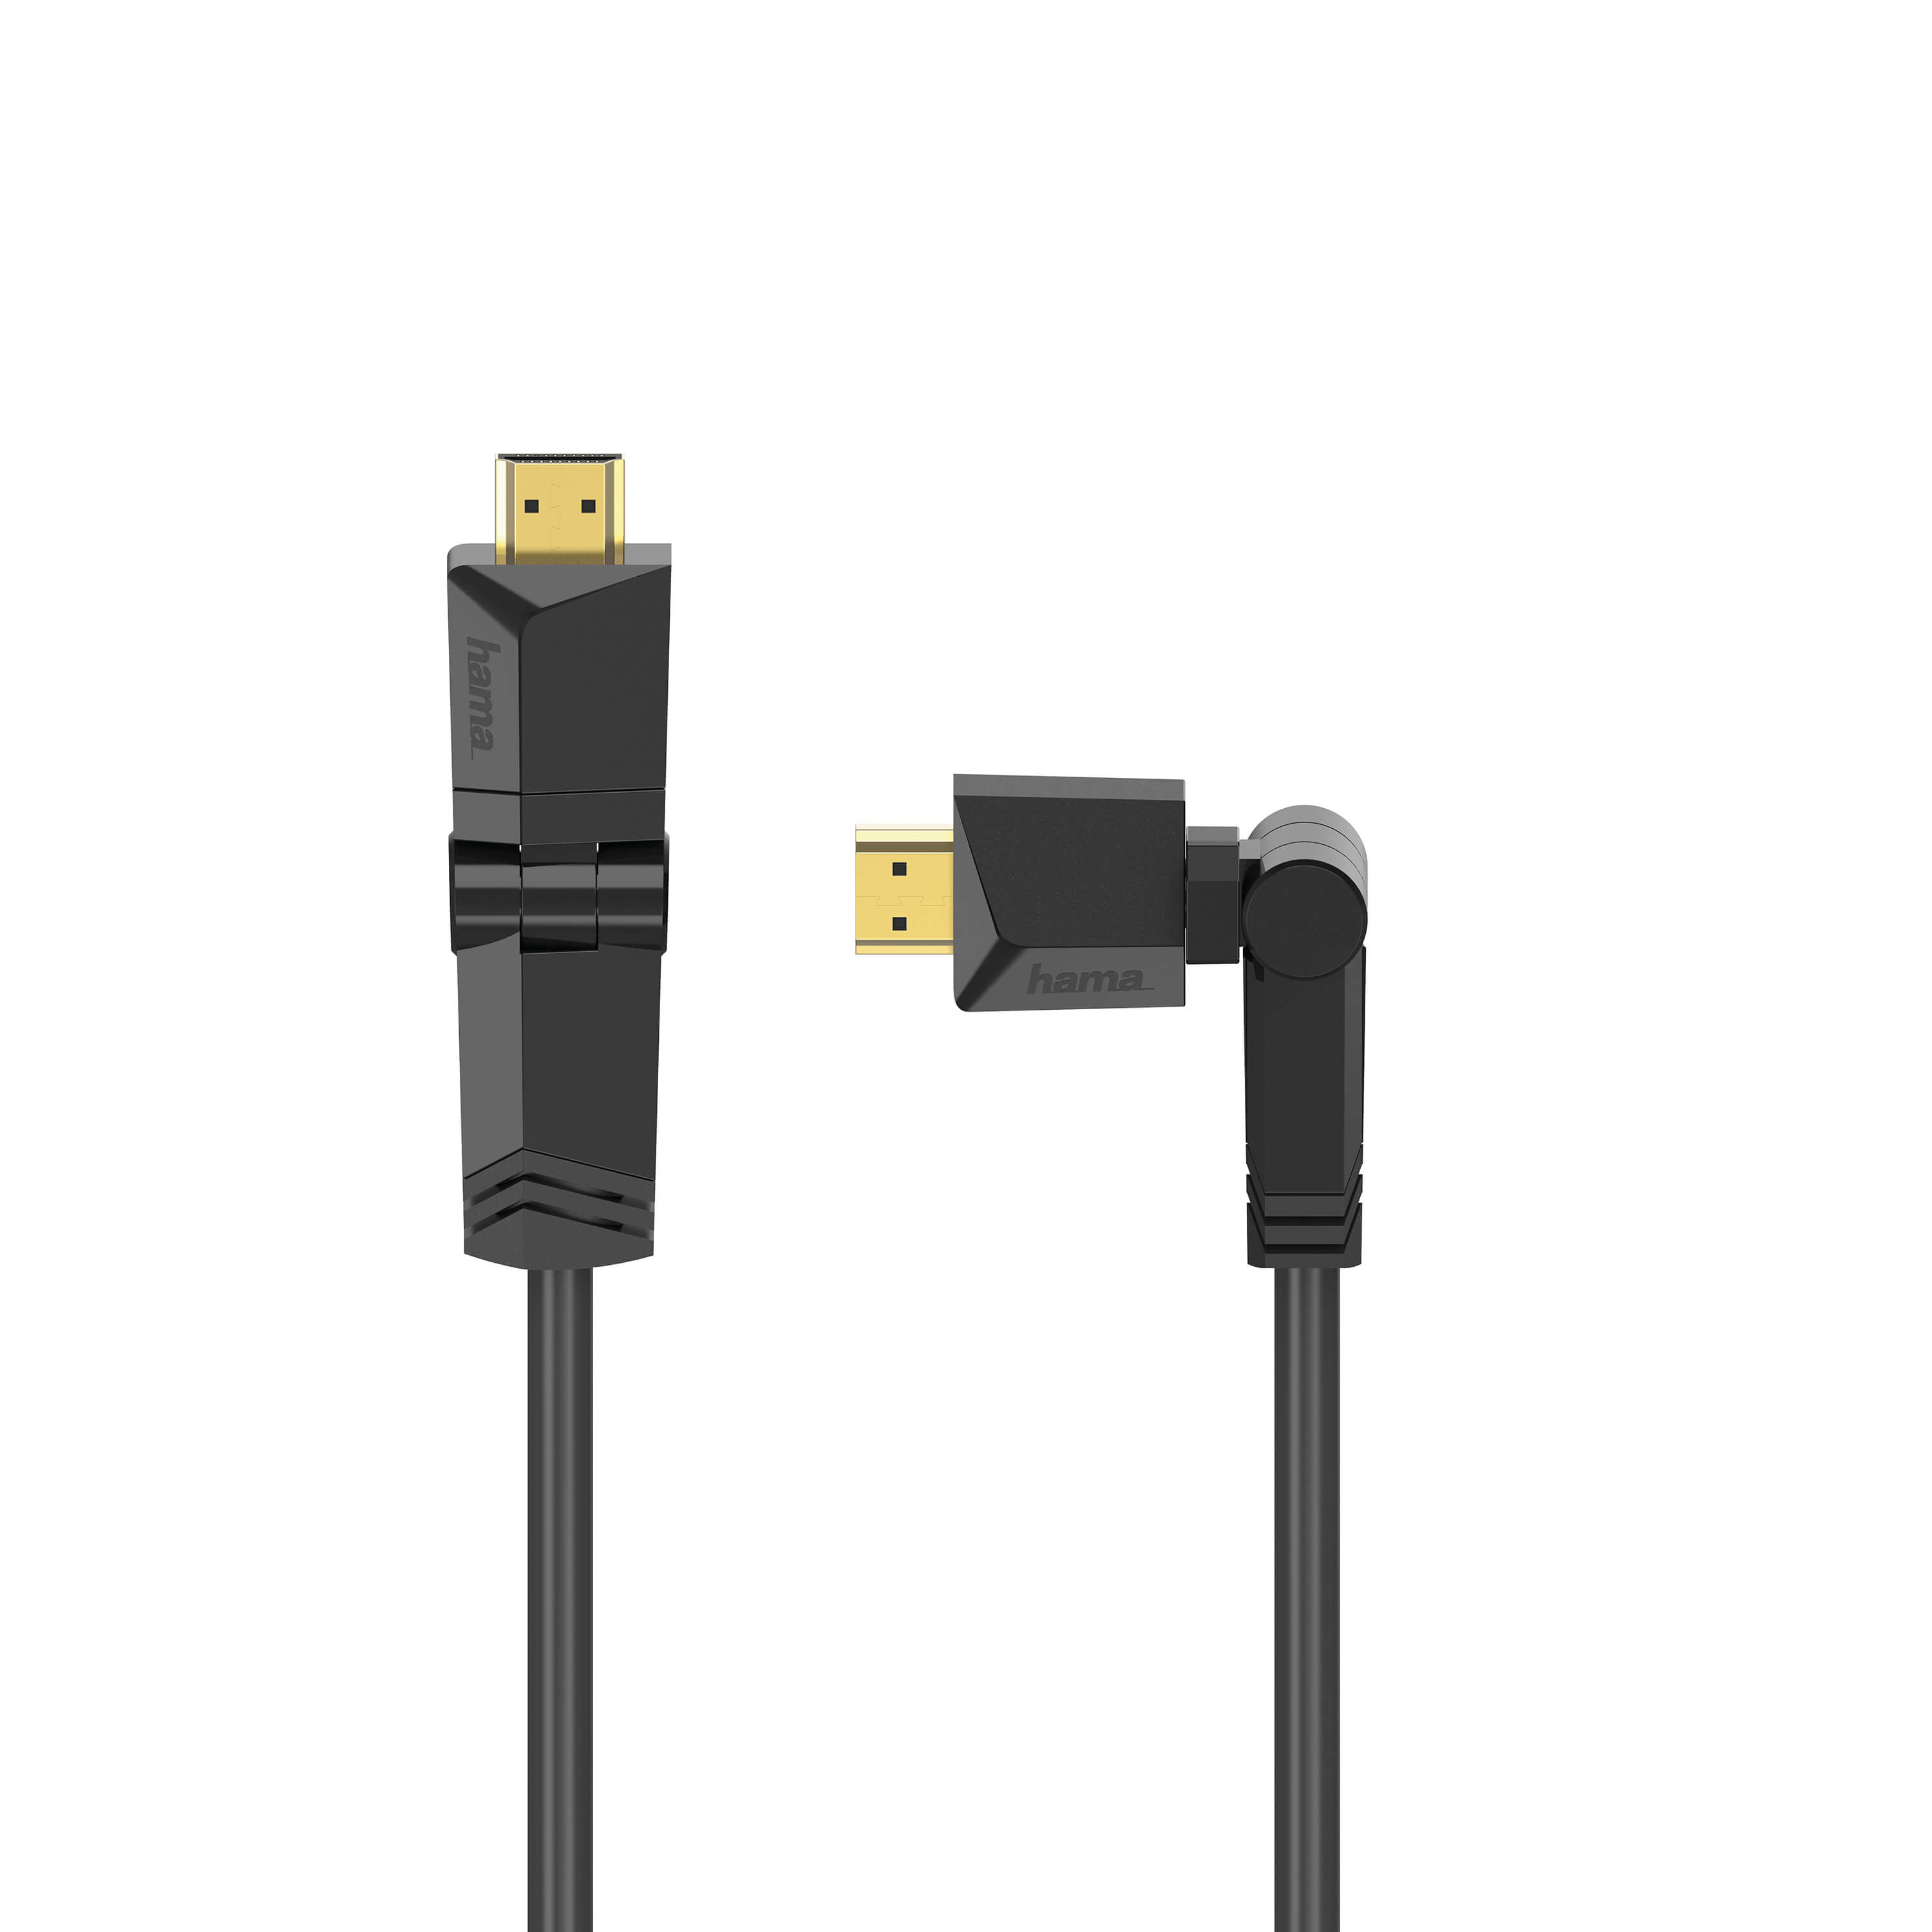 HAMA HDI Cable Ethernet Rotatiing Gold Black 1.5m